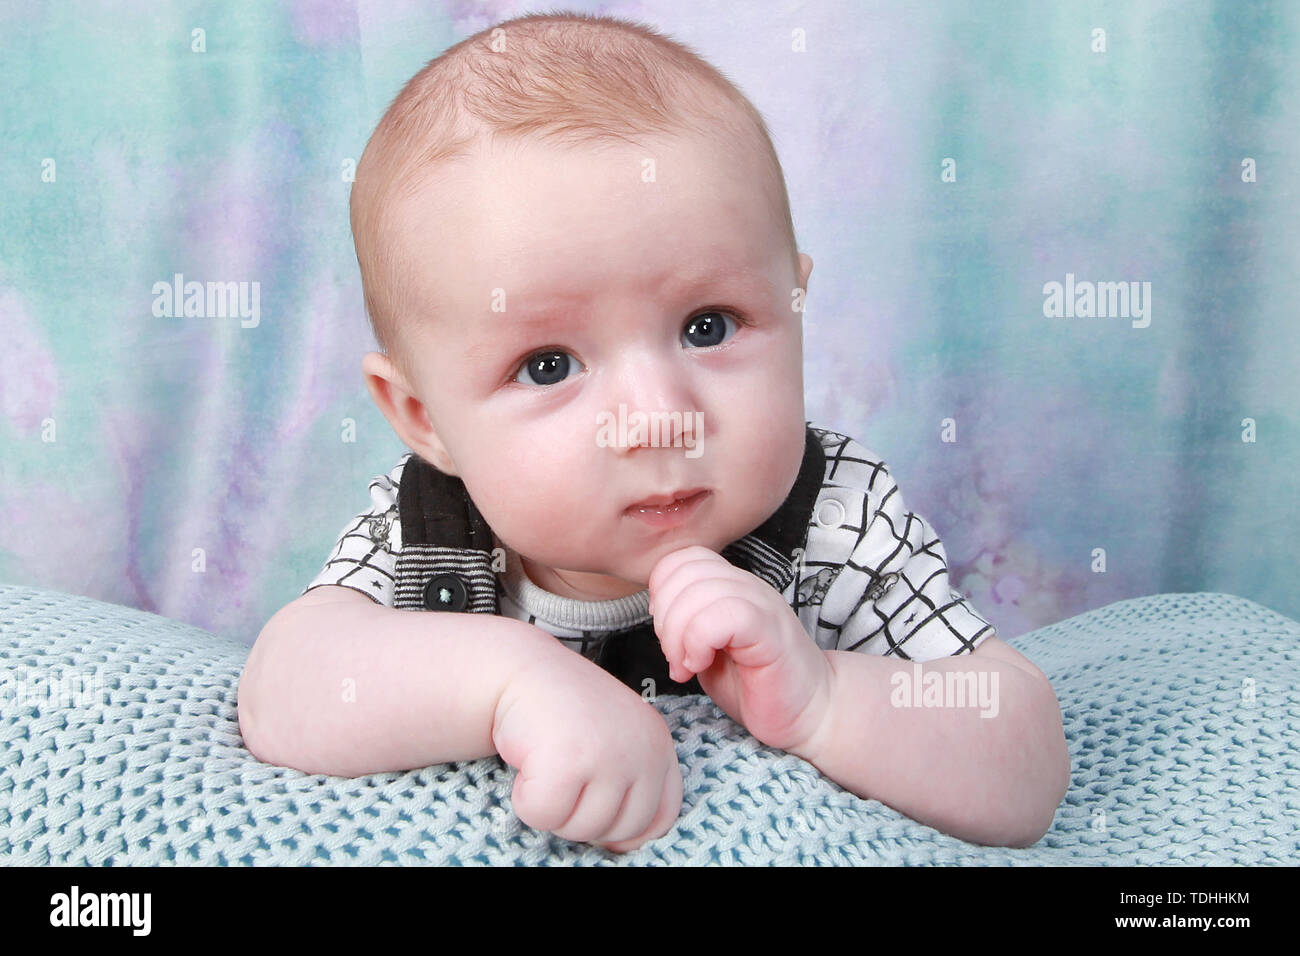 3 month old baby boy relaxing Stock Photo